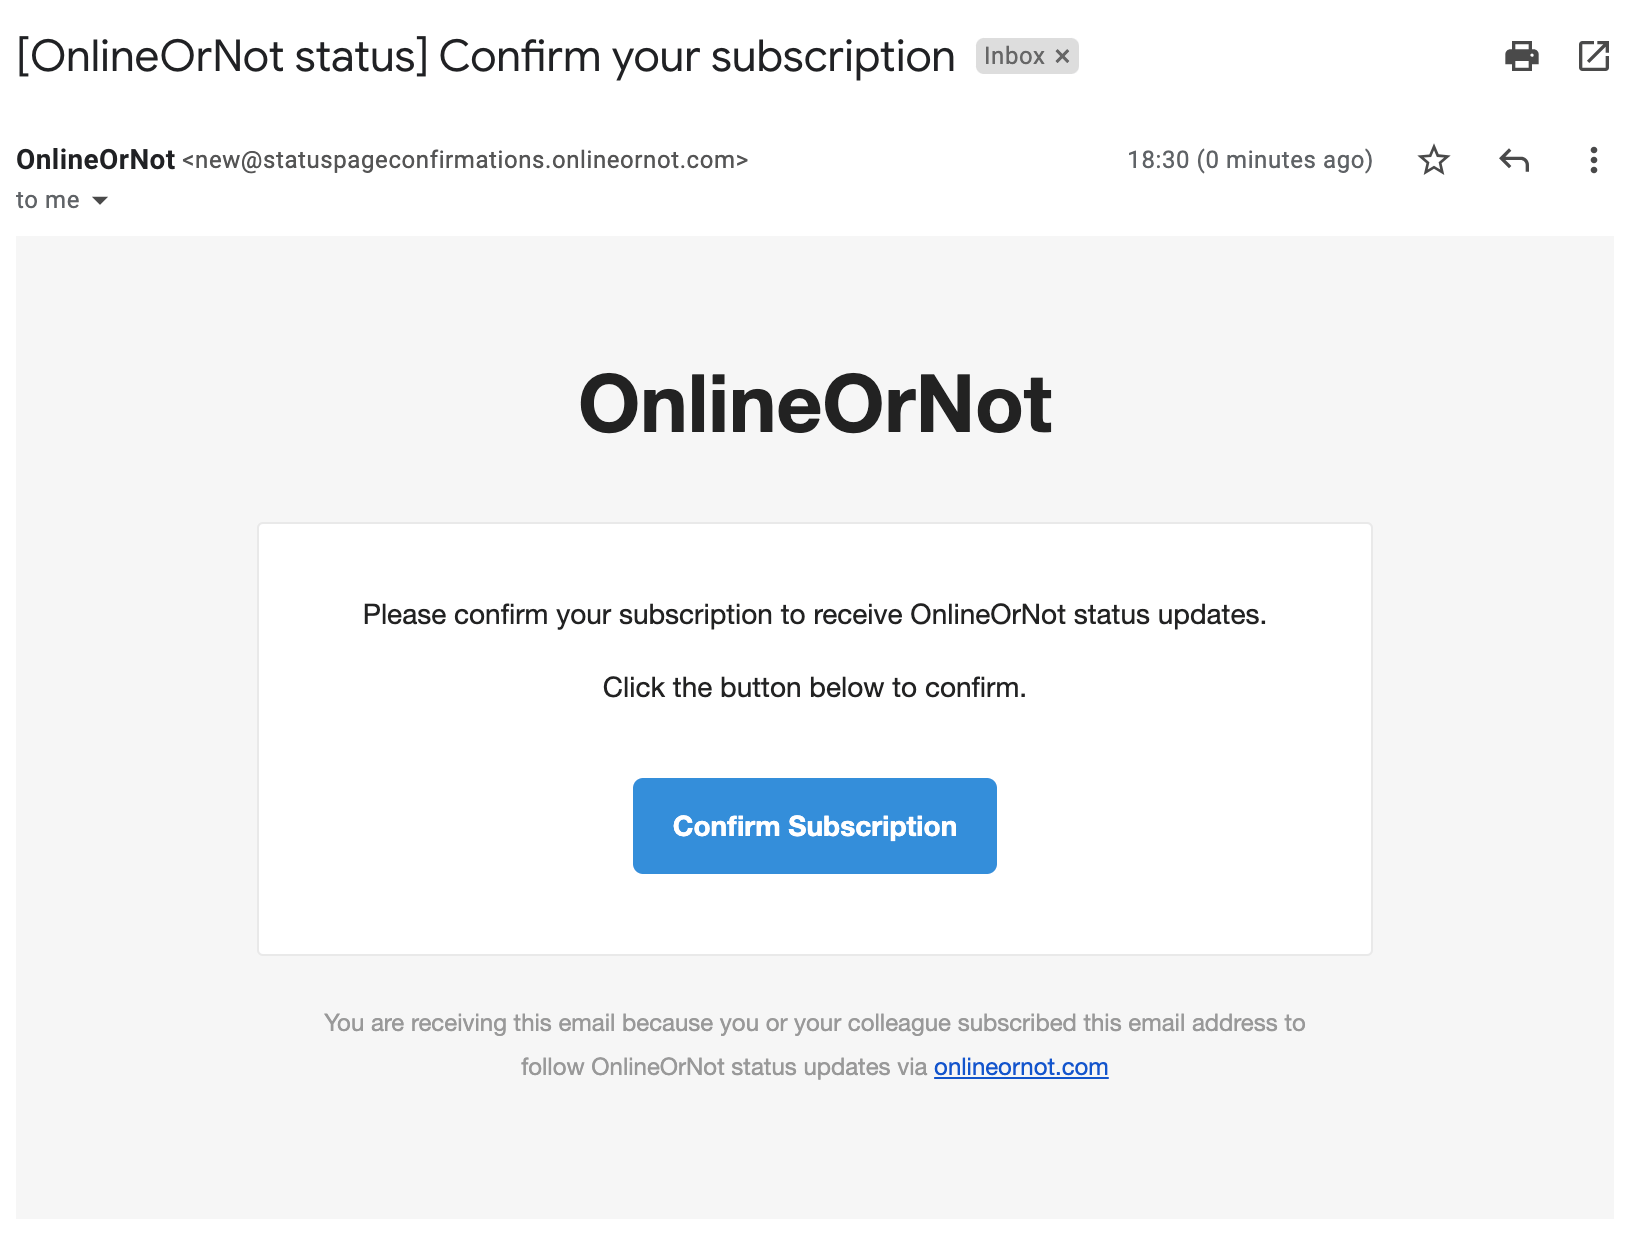 OnlineOrNot Status Pages Confirm Subscription